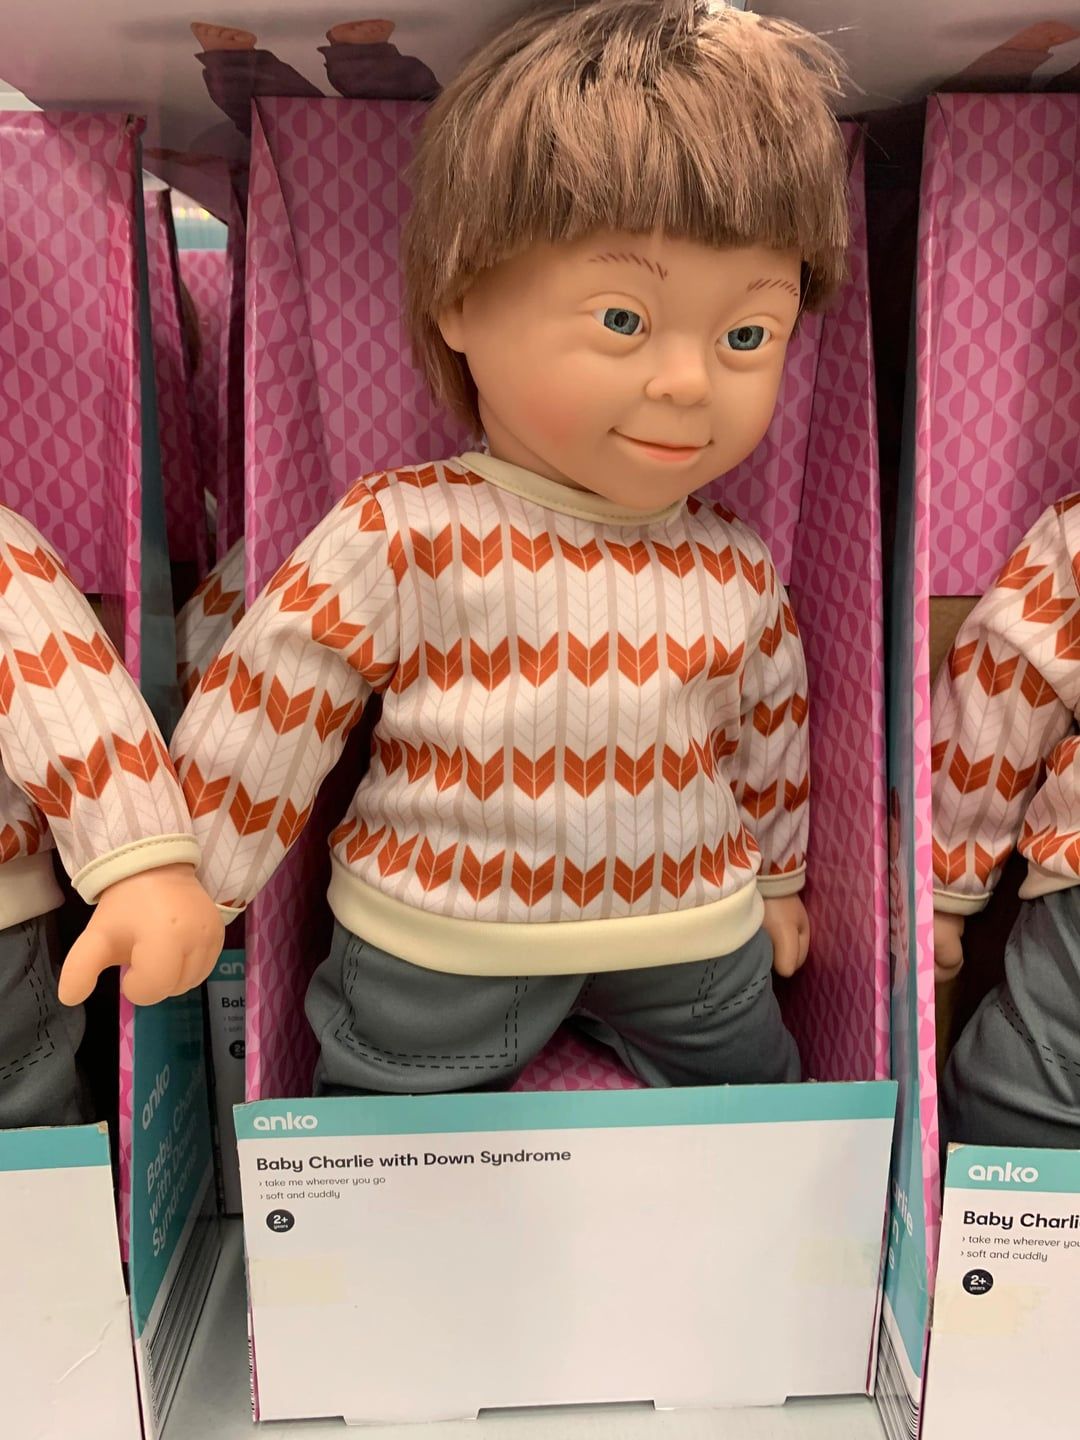 kmart-has-a-doll-with-downs-syndrome-v0-hlavdgg2nr5a1.jpg